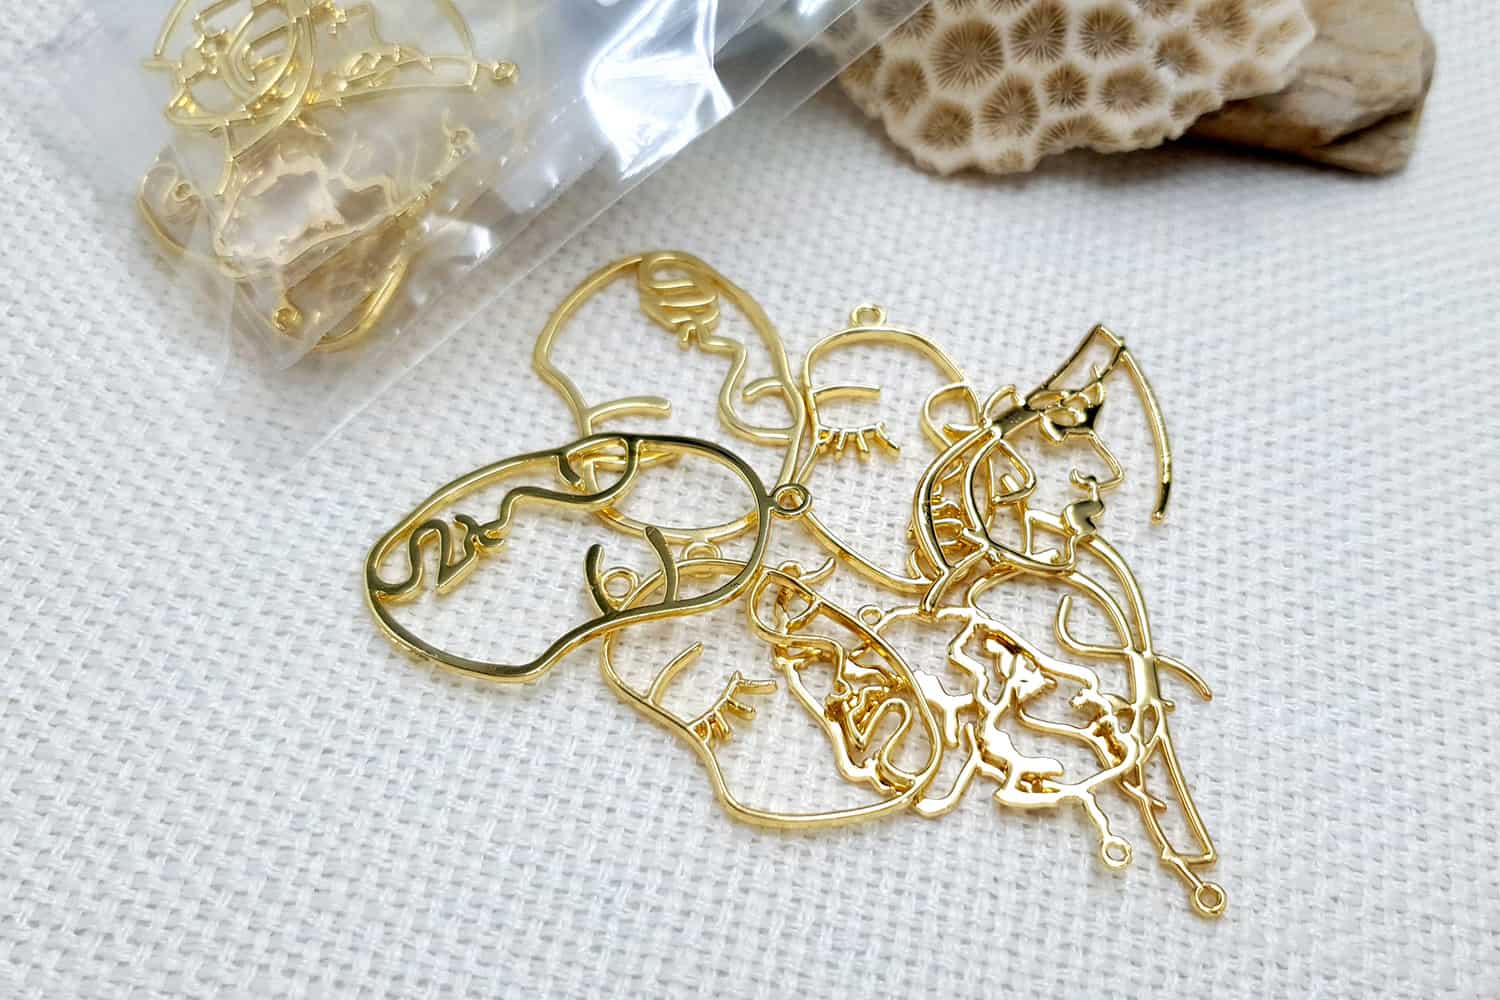 Faces - Set of 8pcs Golden Color Metal Jewelry Findings (22389)